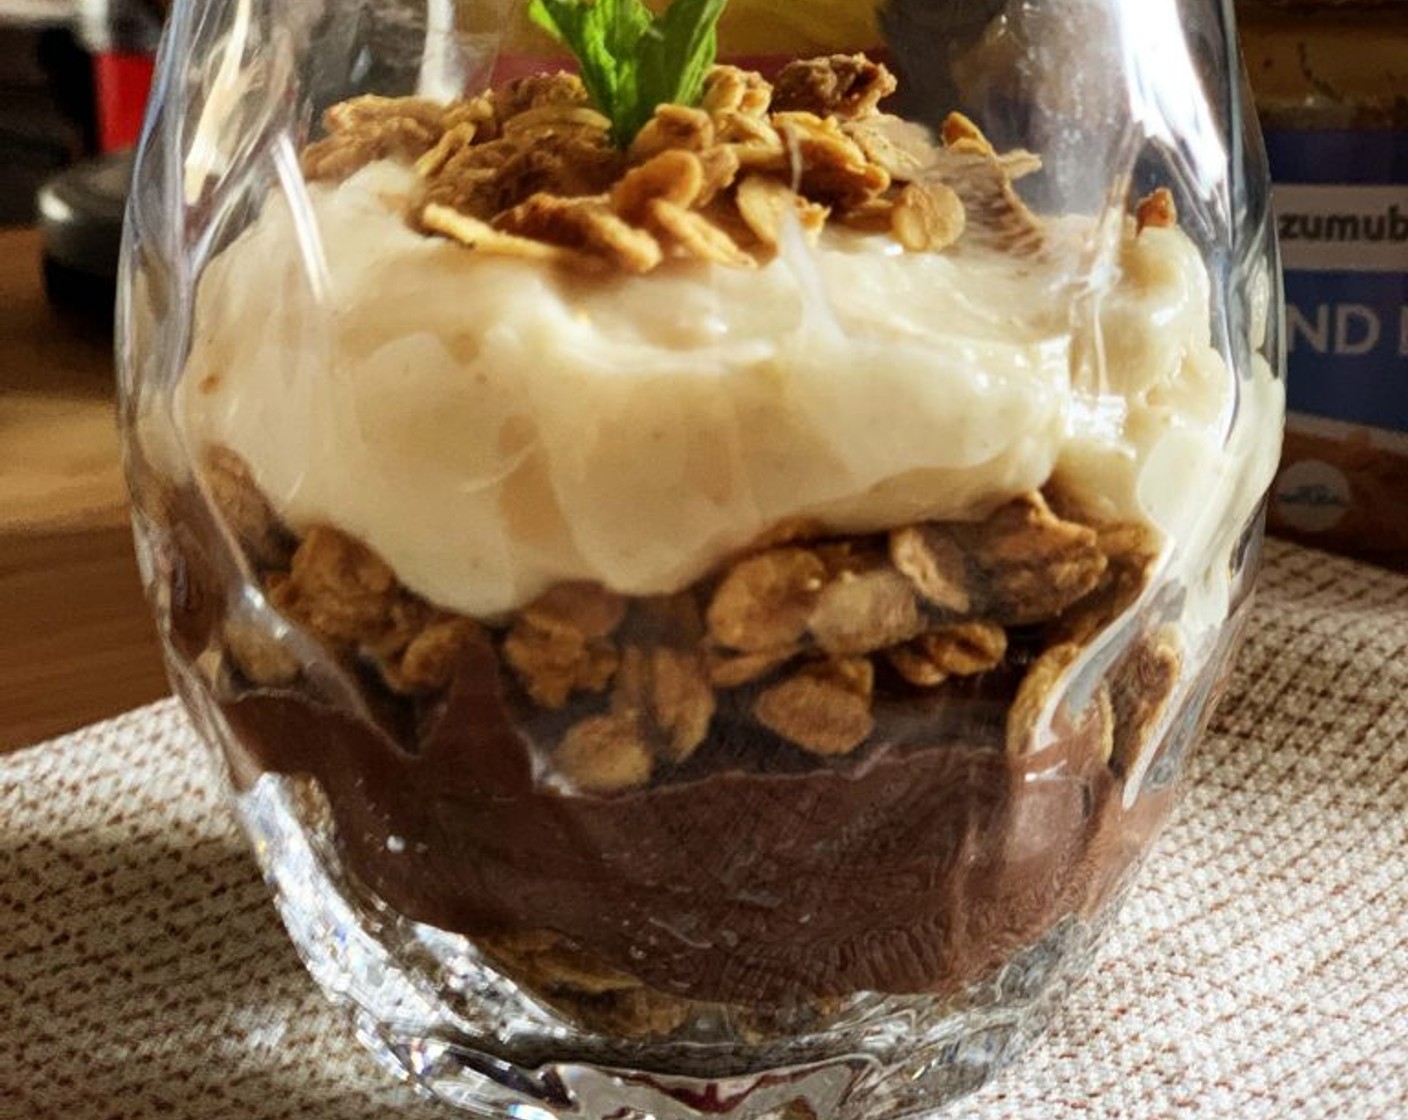 step 9 Next, to assemble your parfait, just lay some granola at the bottom of your container, cover it with a layer of chocolate custard, then place more granola, next is lemon custard. Decorate the top with some more granola or a dusting of cinnamon if you like!